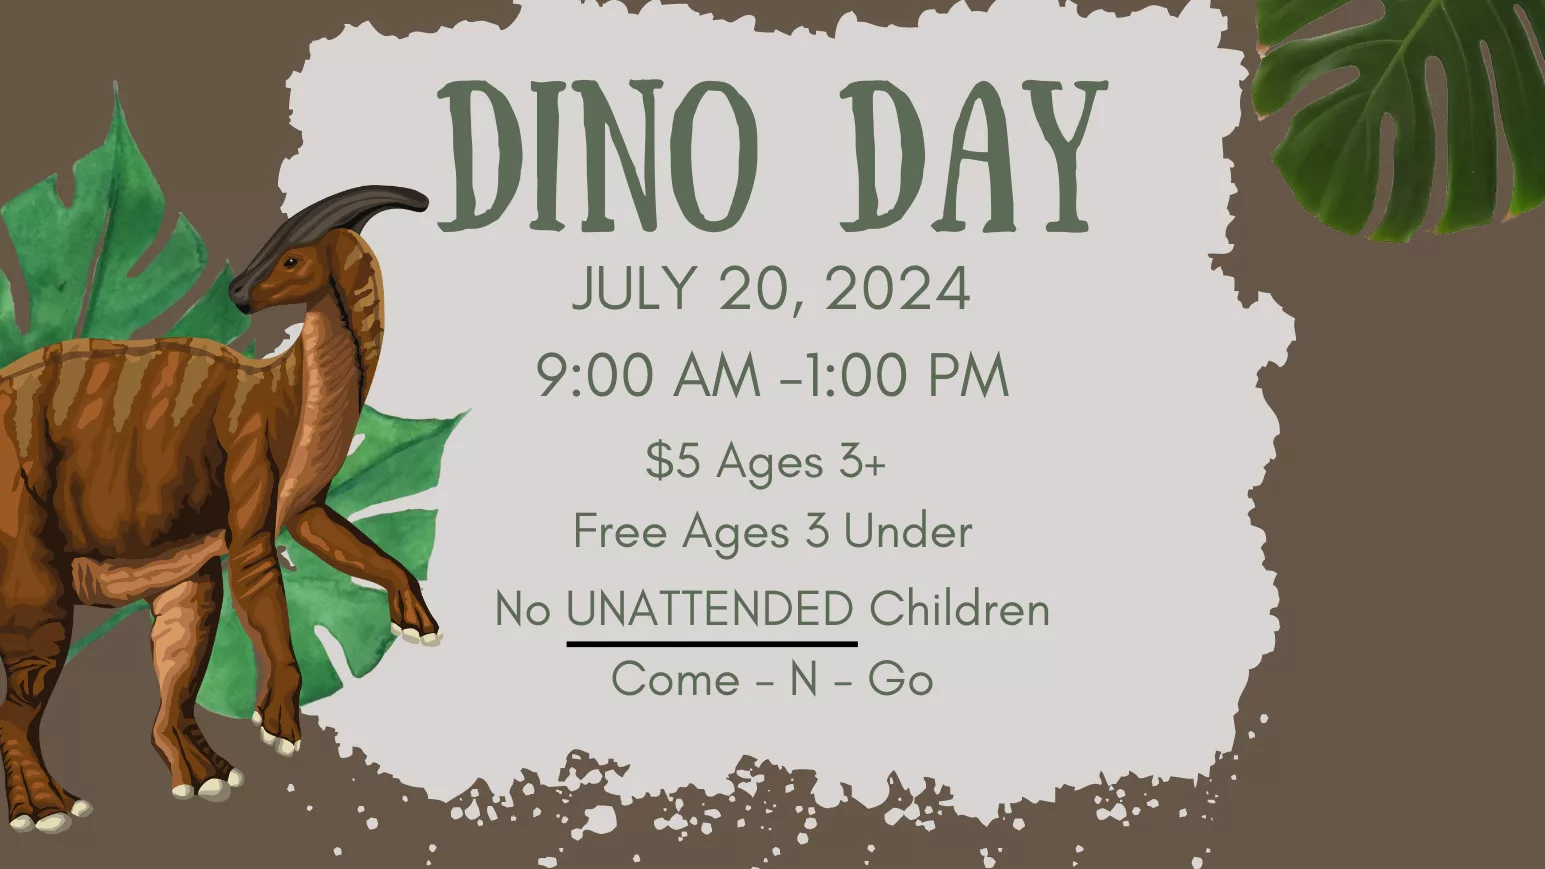 dino-day-flyers-dino-day-flyer-2024